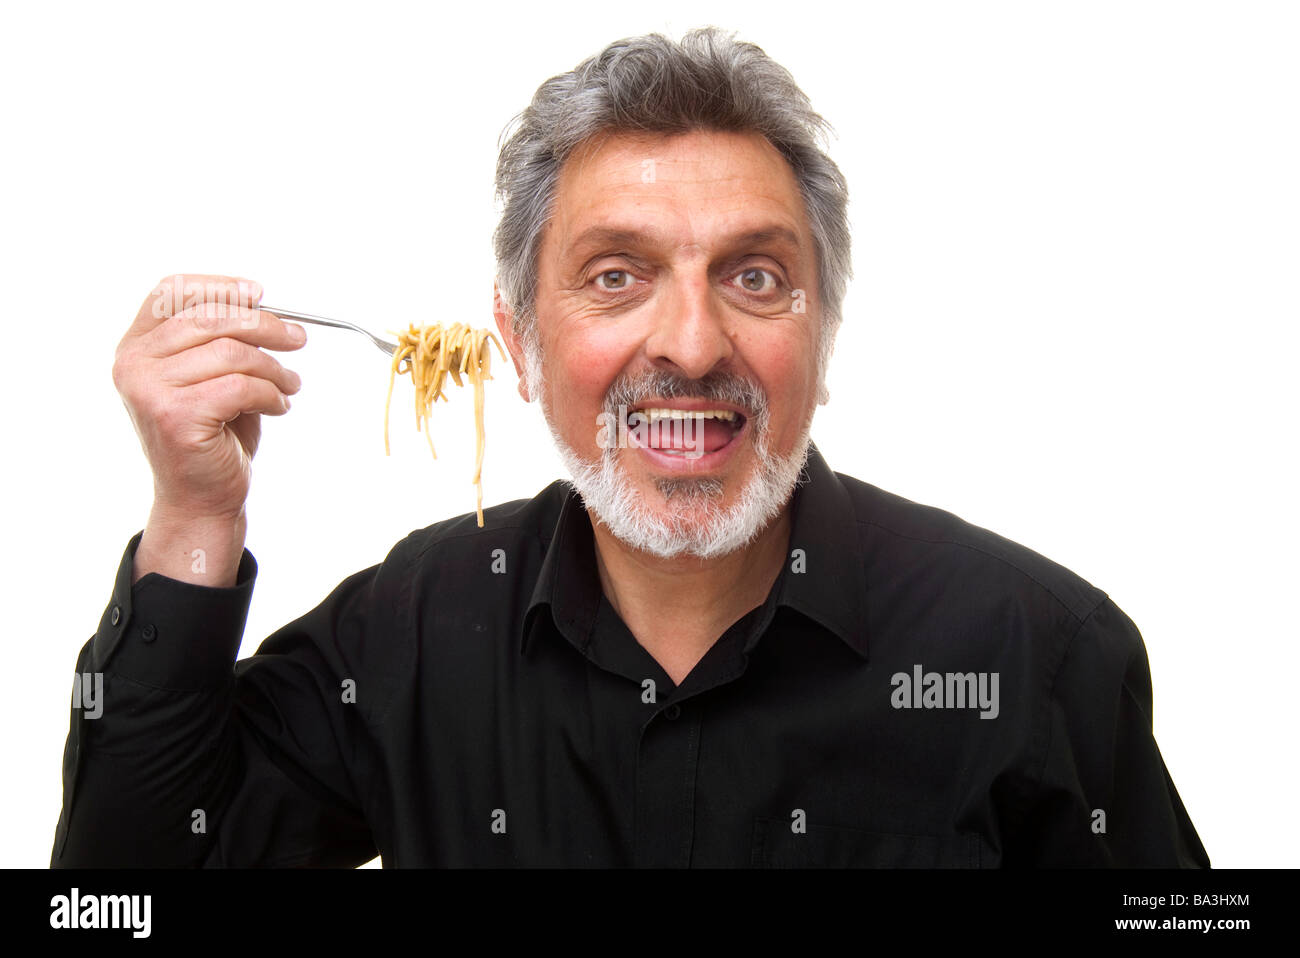 man with a fork full of spagetti Stock Photo